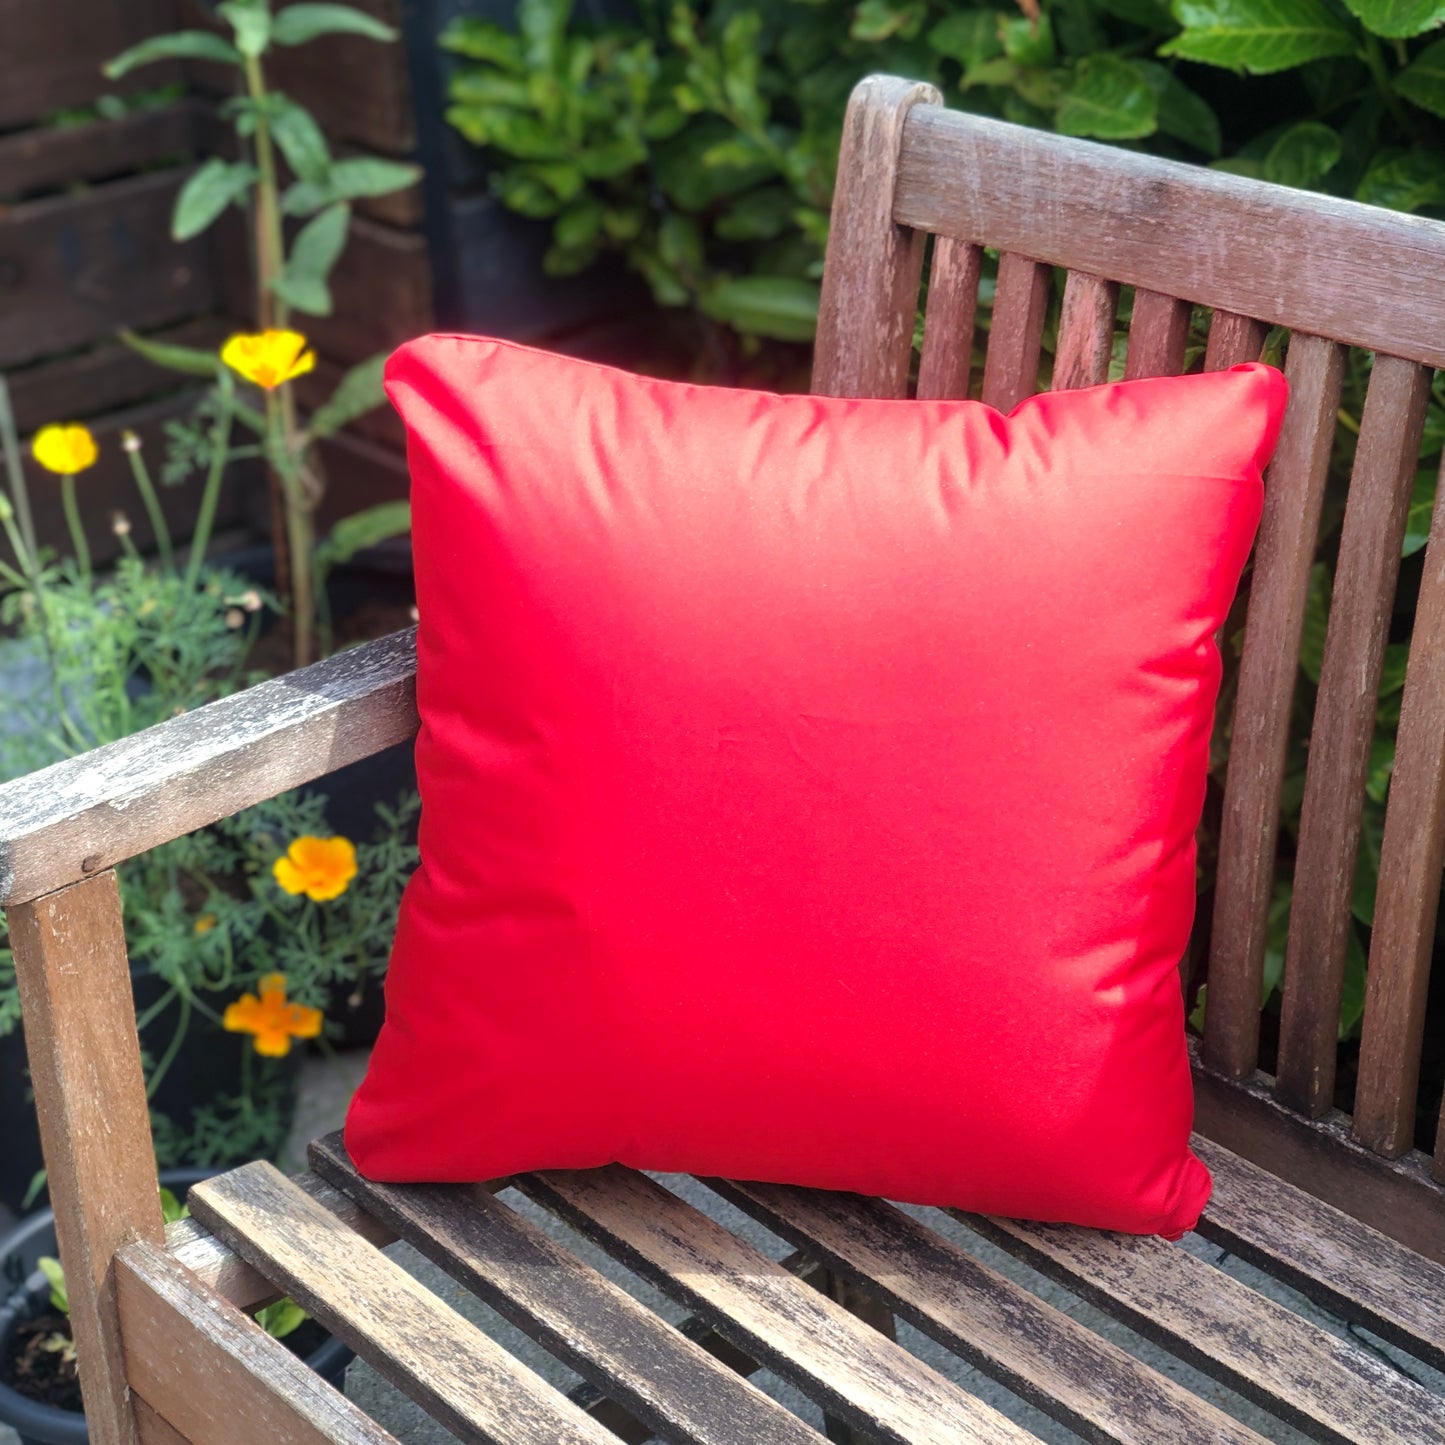 Outdoor Cushion Covers - Waterproof, Wipe Clean, Bring comfort to your outdoor space!